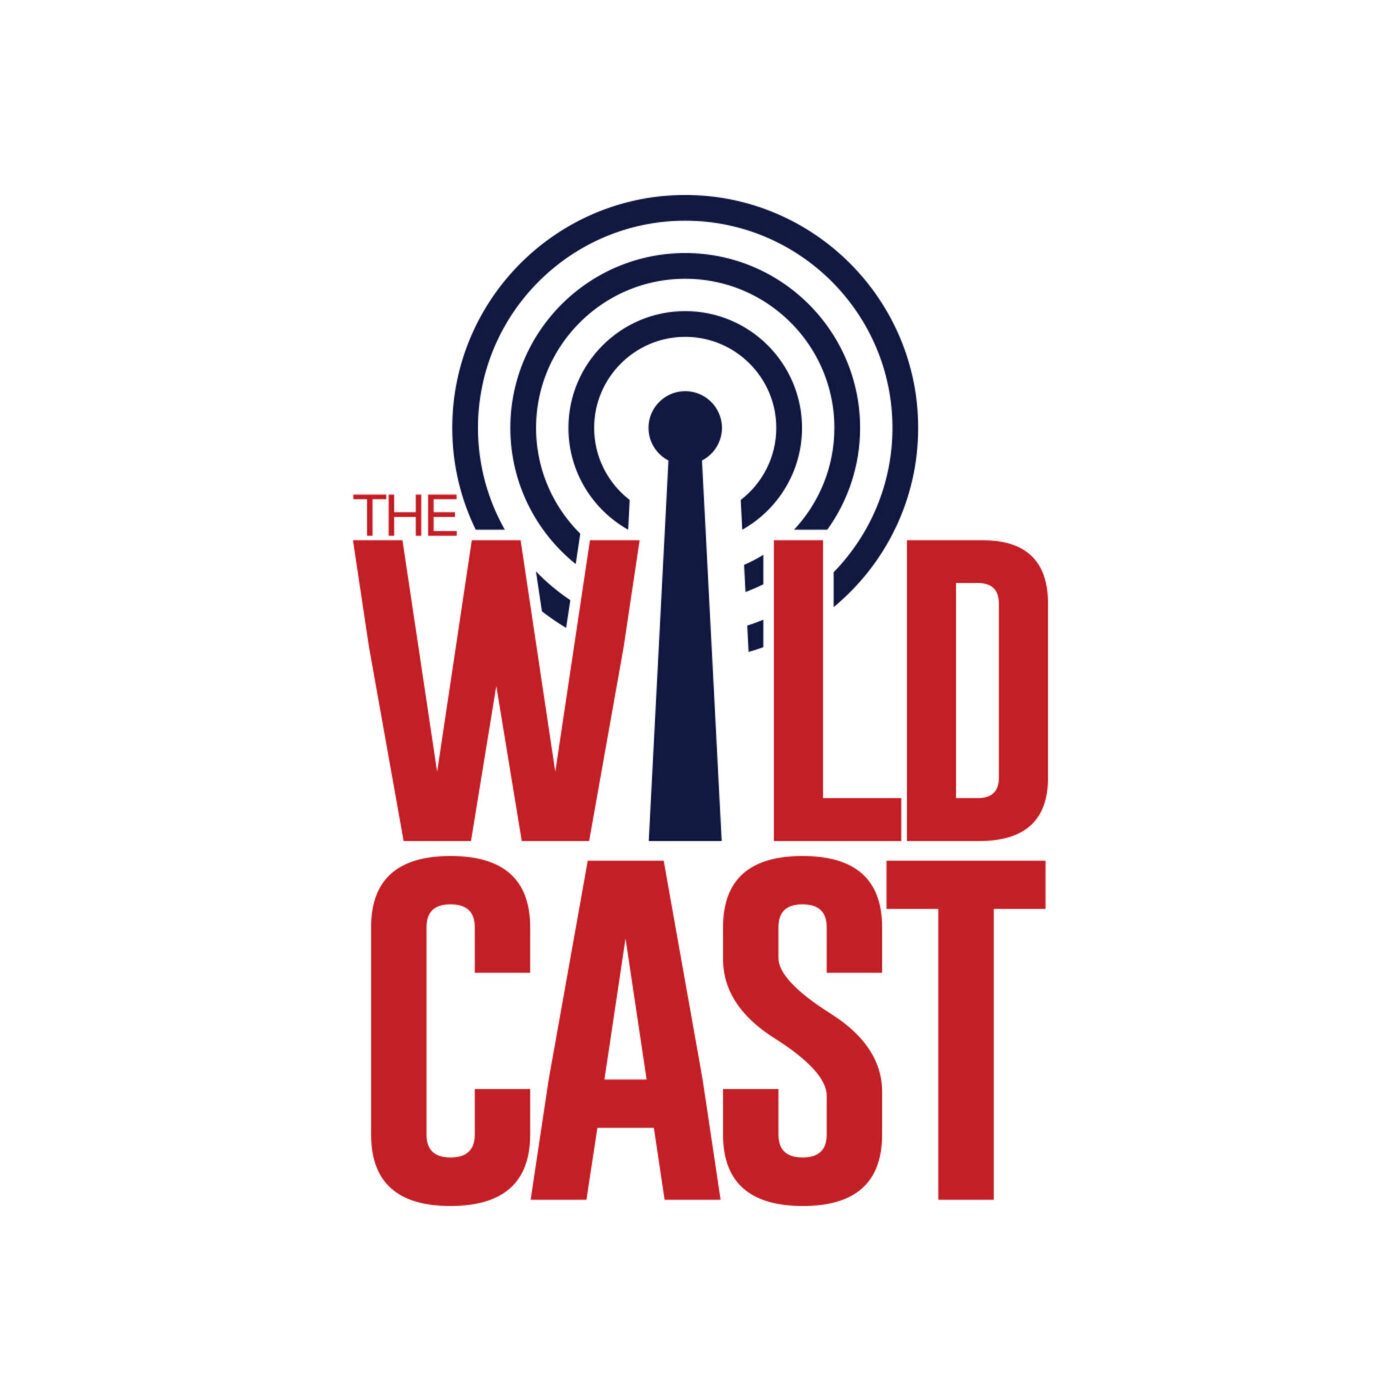 The Wildcast, Episode 446: Arizona looks to end regular season on high note with Territorial Cup win